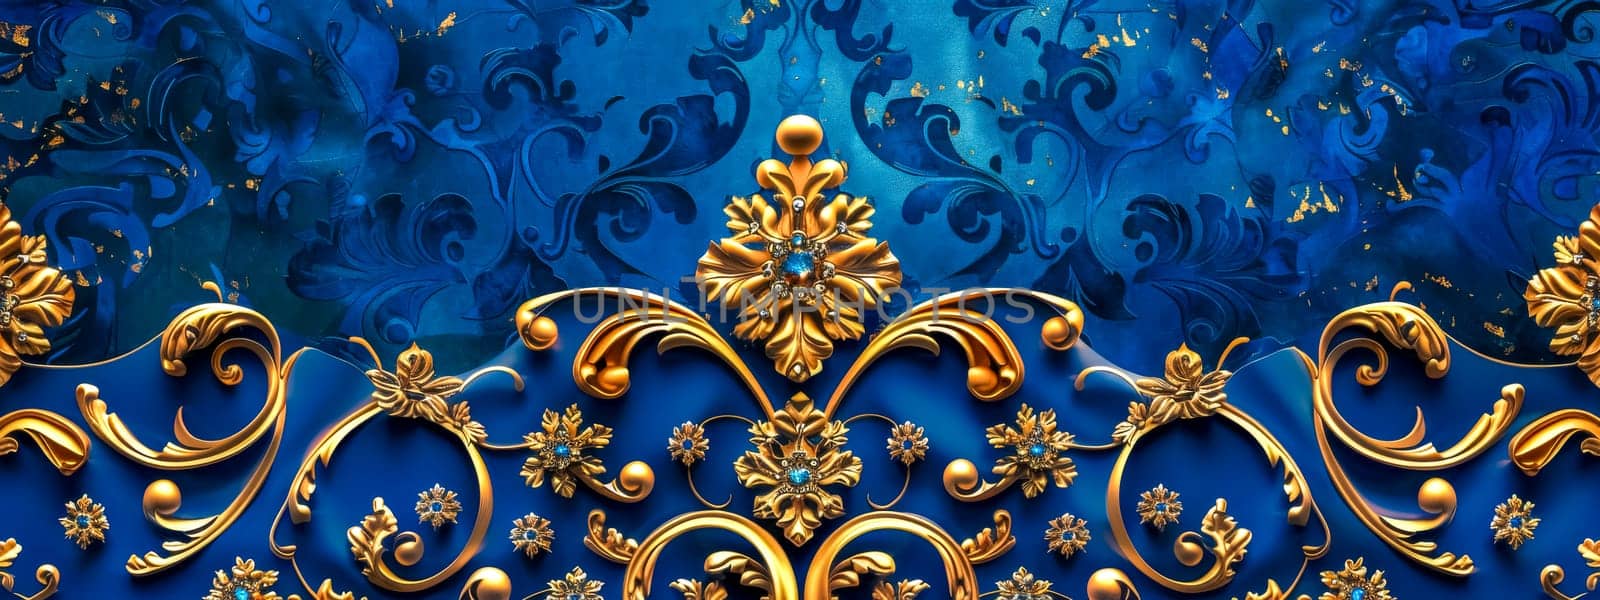 Elegant gold scrollwork and floral designs on a vibrant blue textured backdrop